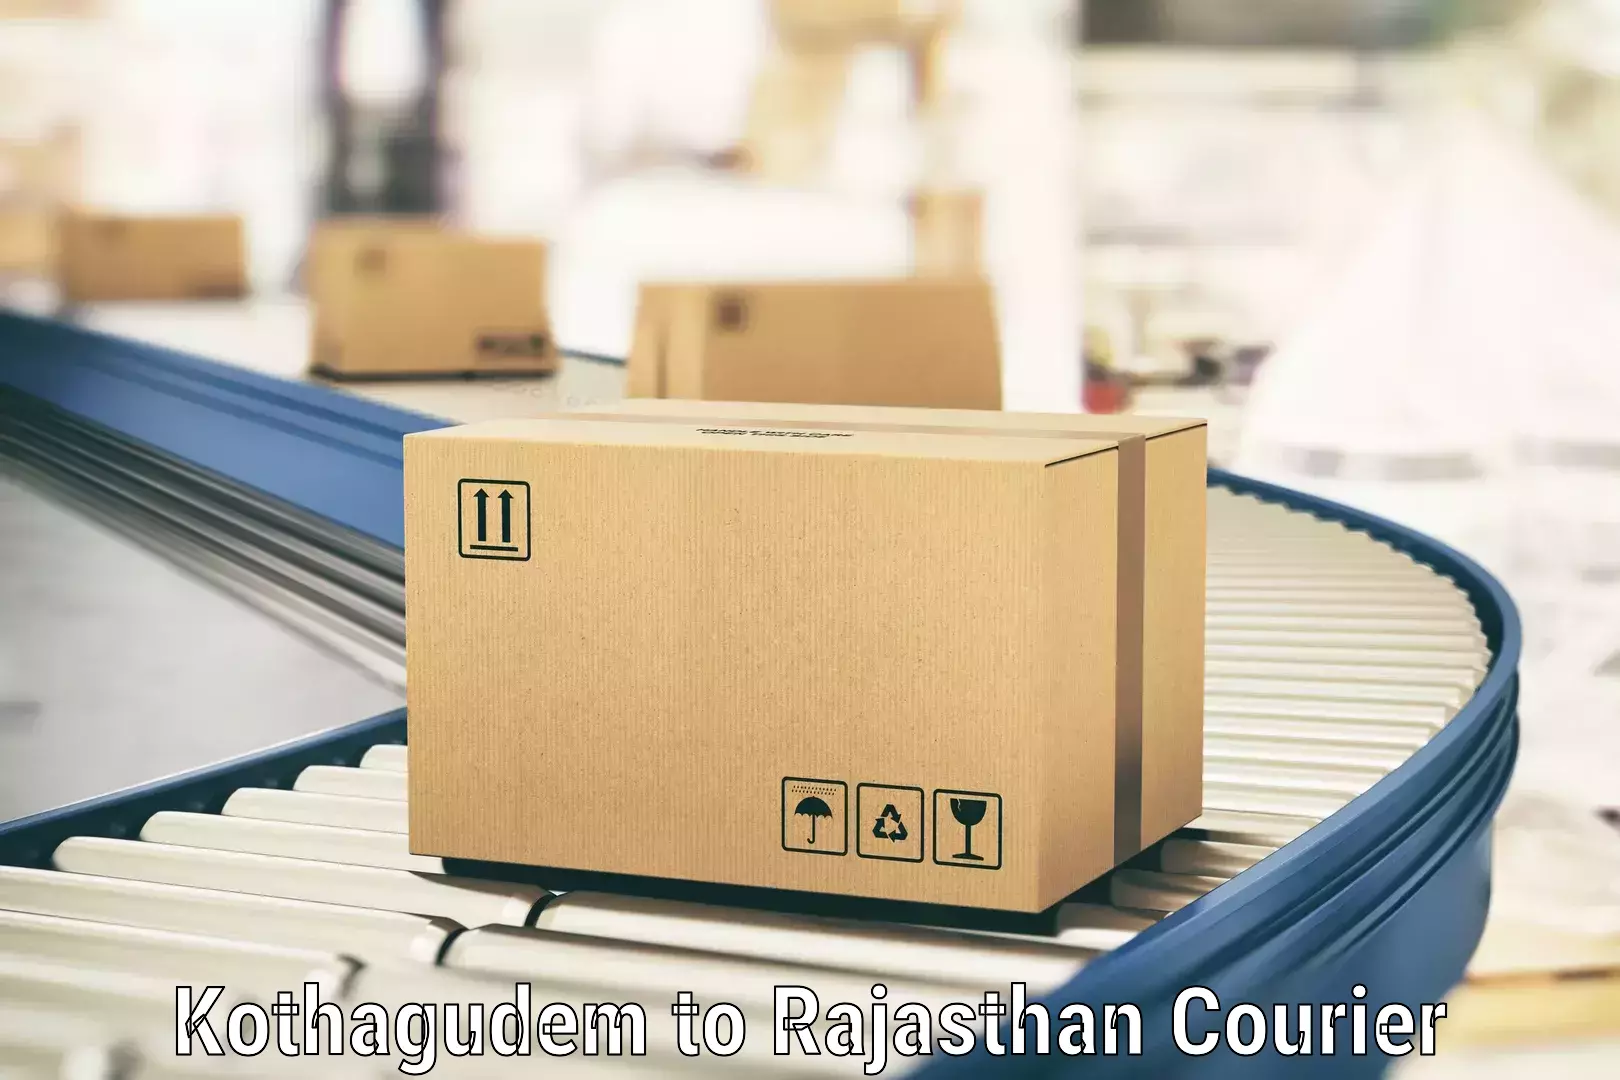 High-quality delivery services in Kothagudem to Rajasthan